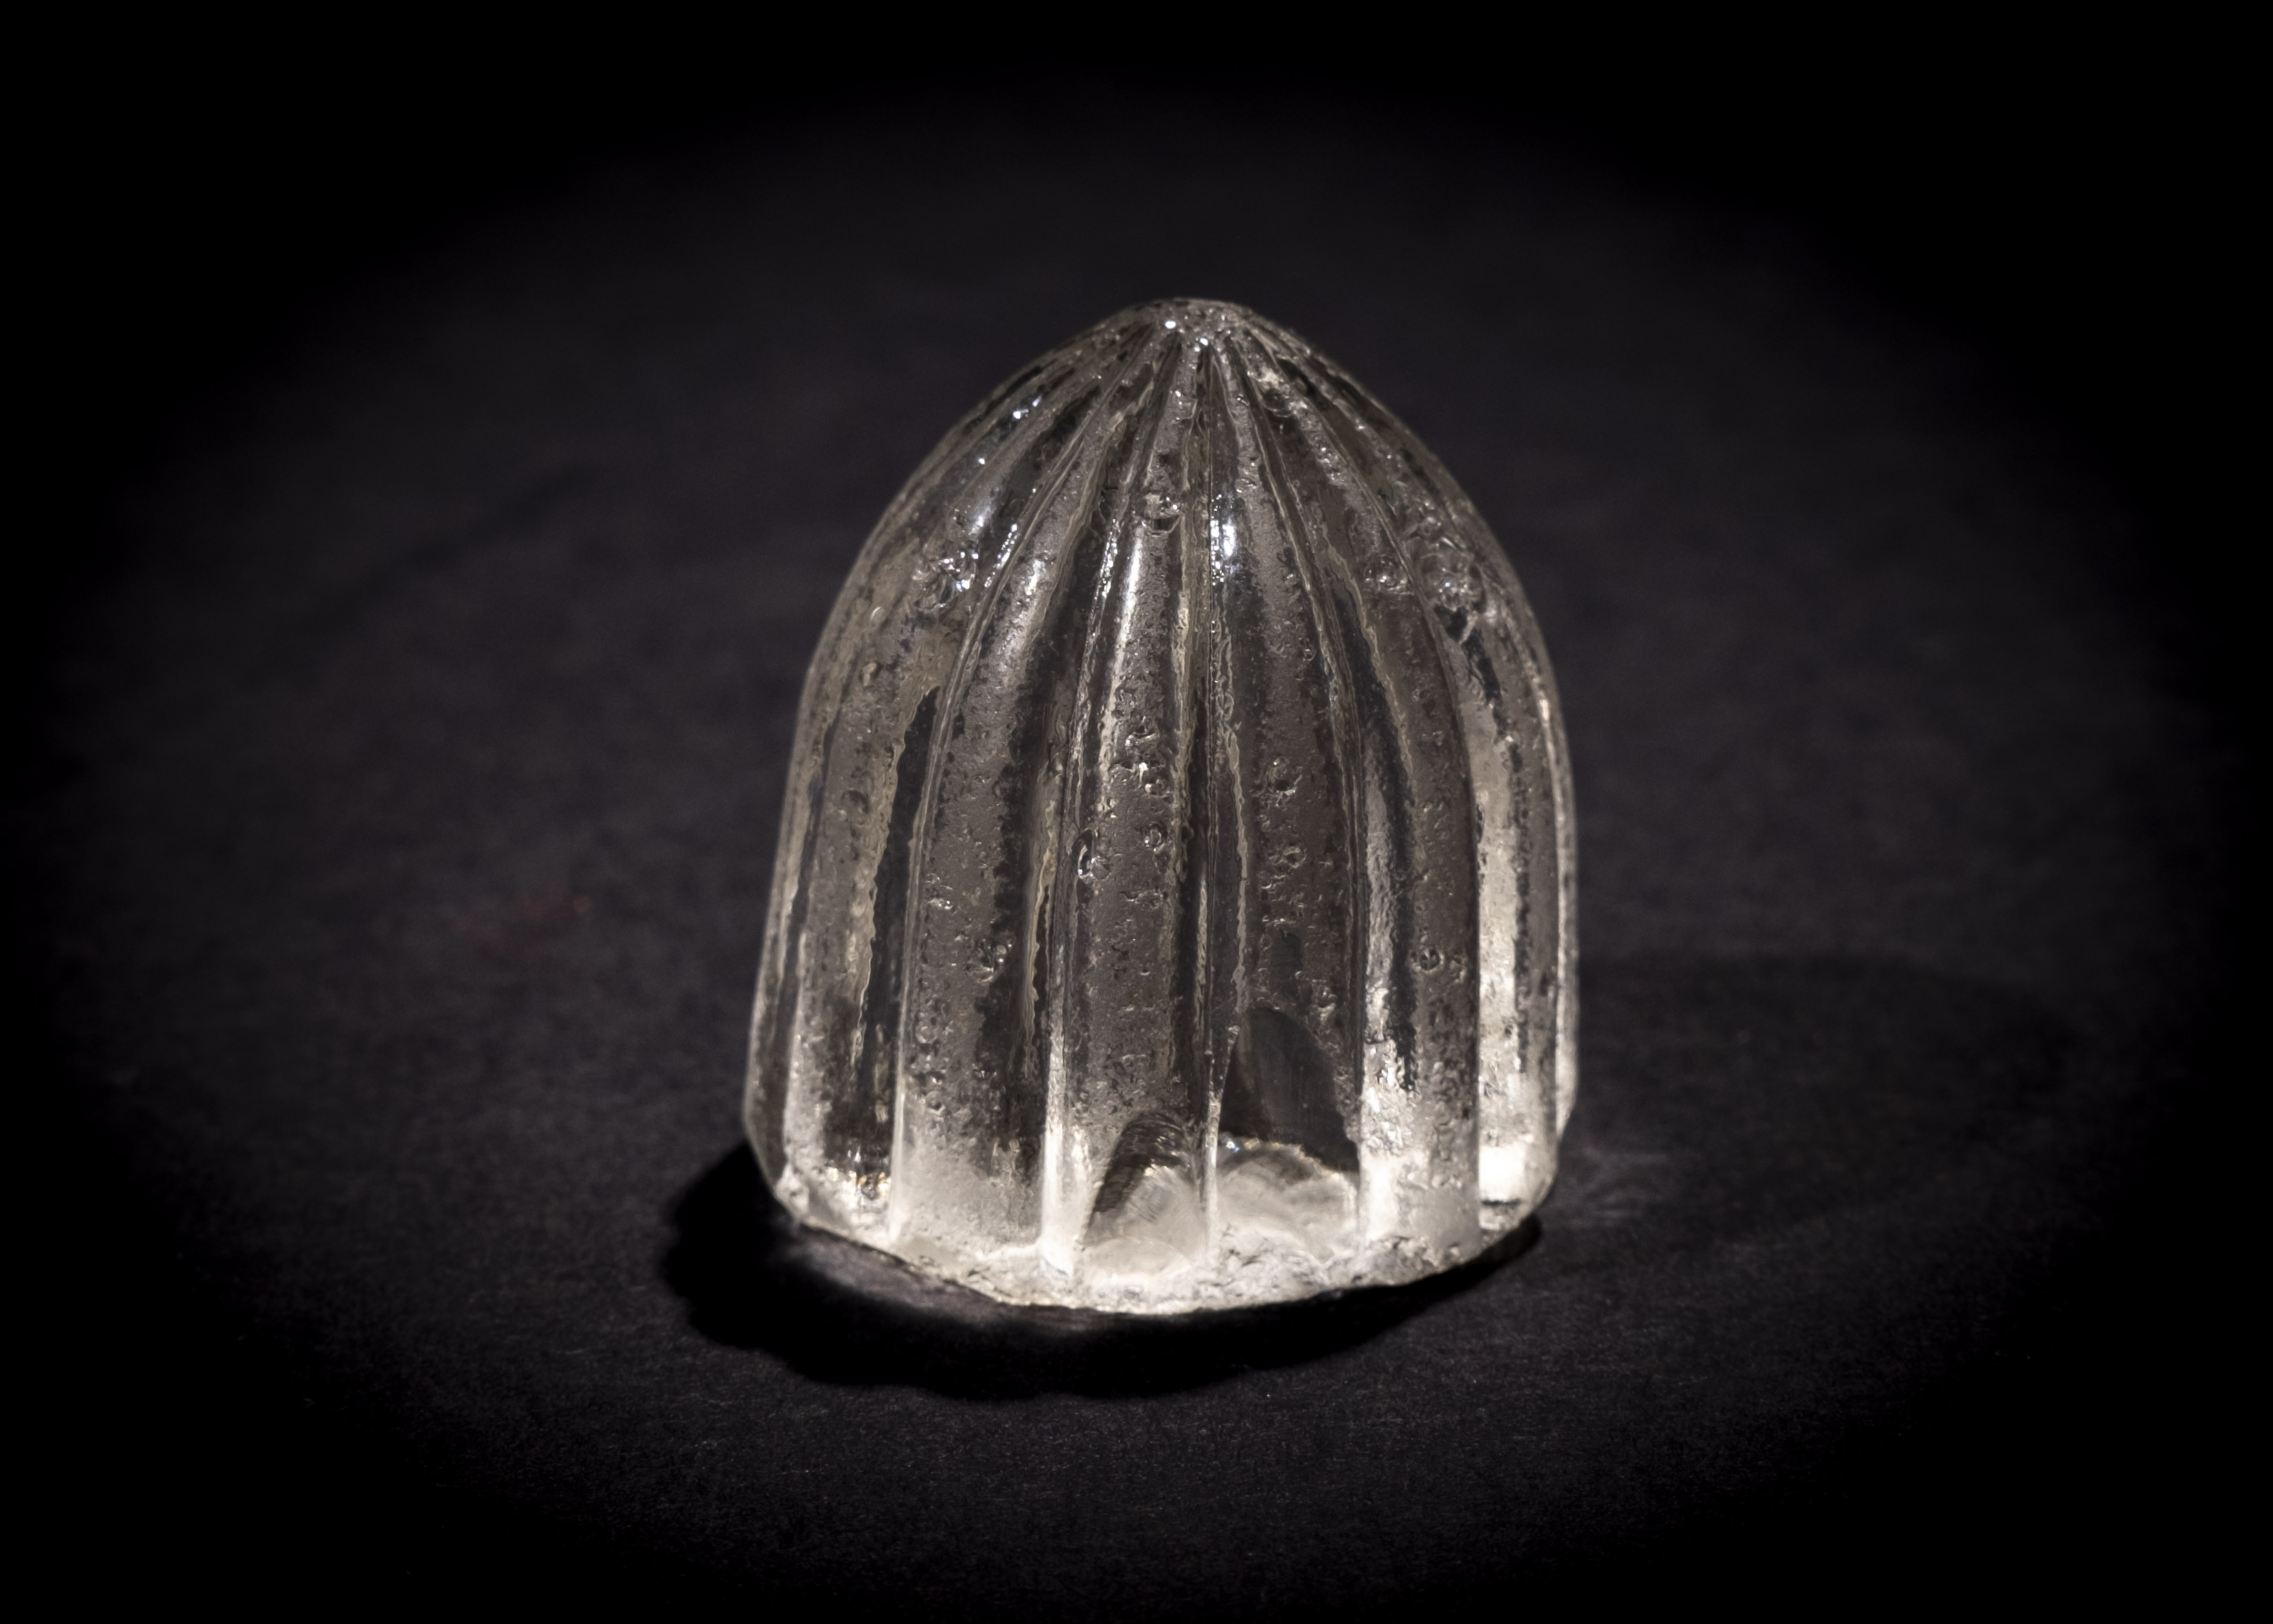 A HIGHLY RARE CARVED ROCK CRYSTAL CHESS PIECE, FATIMID 12TH CENTURY OR EARLIER